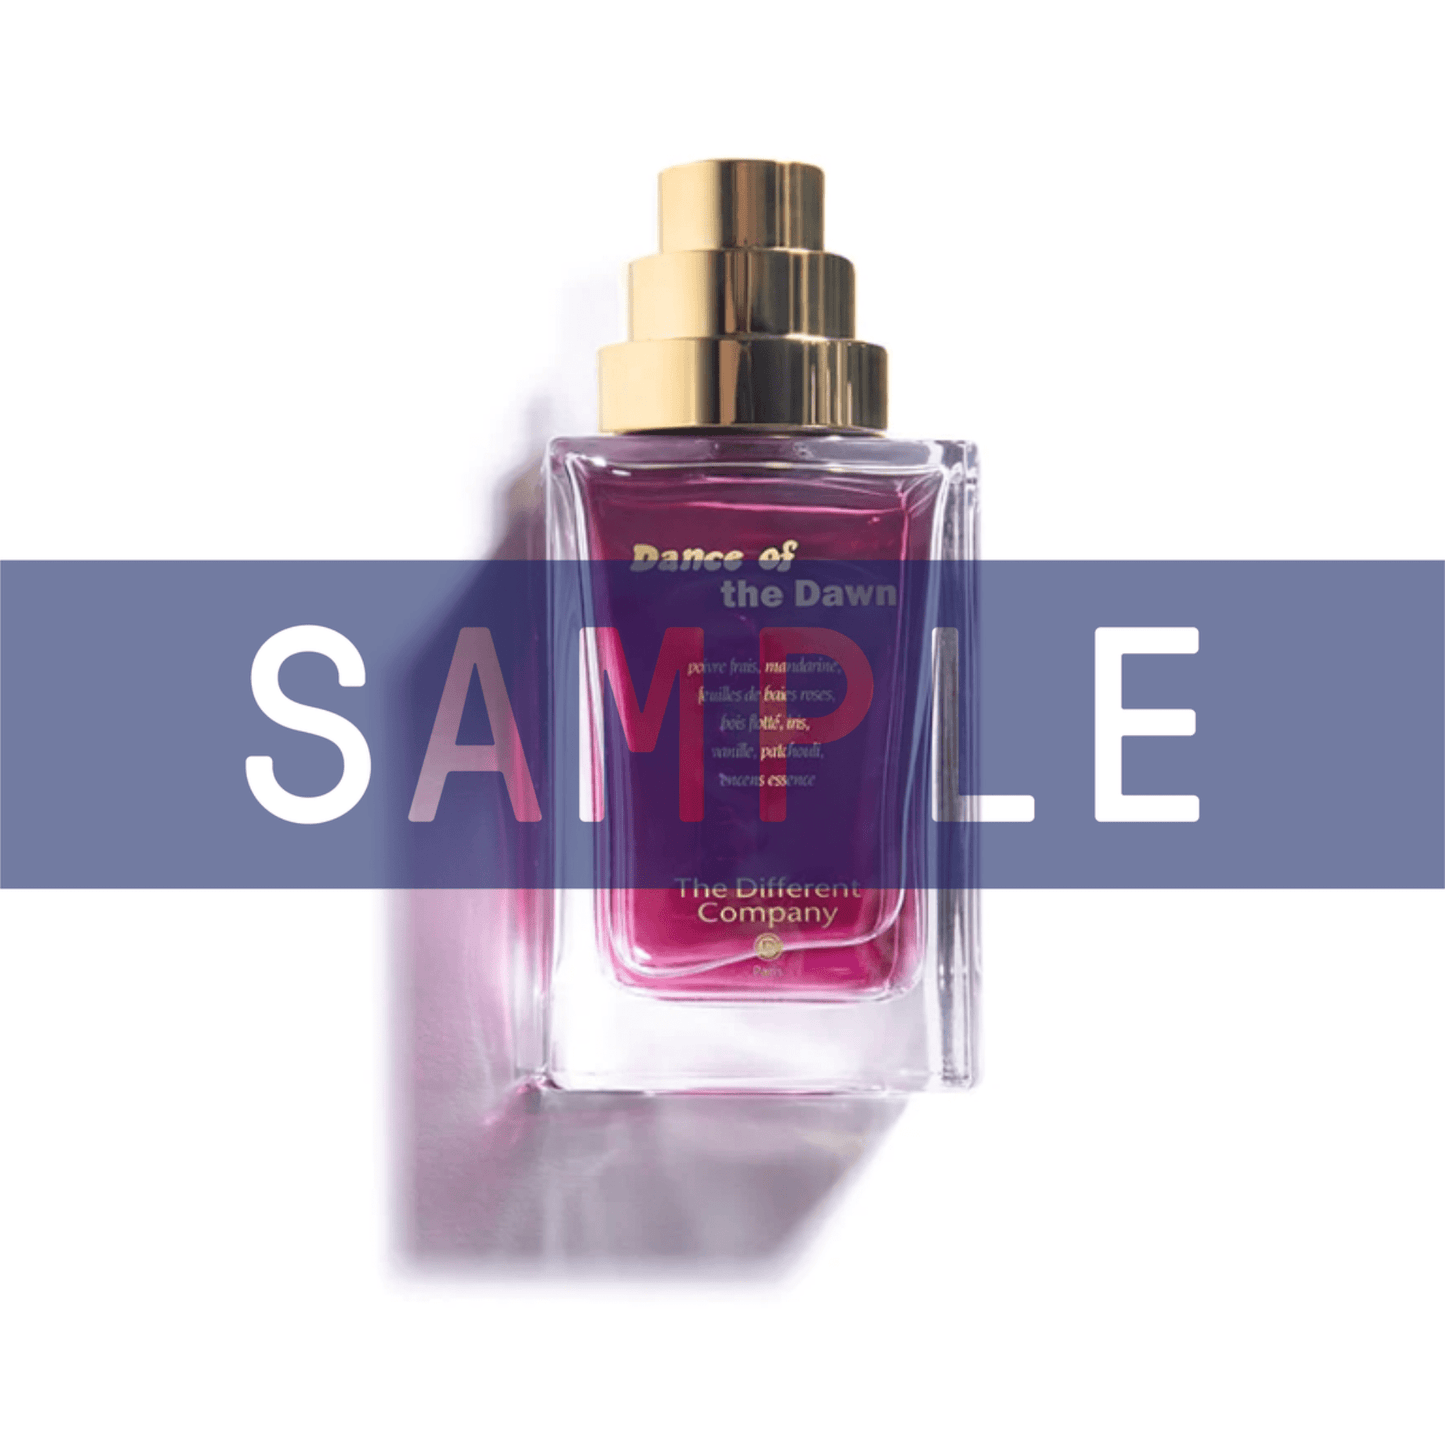 Primary Image of Sample - Dance of the Dawn EDP